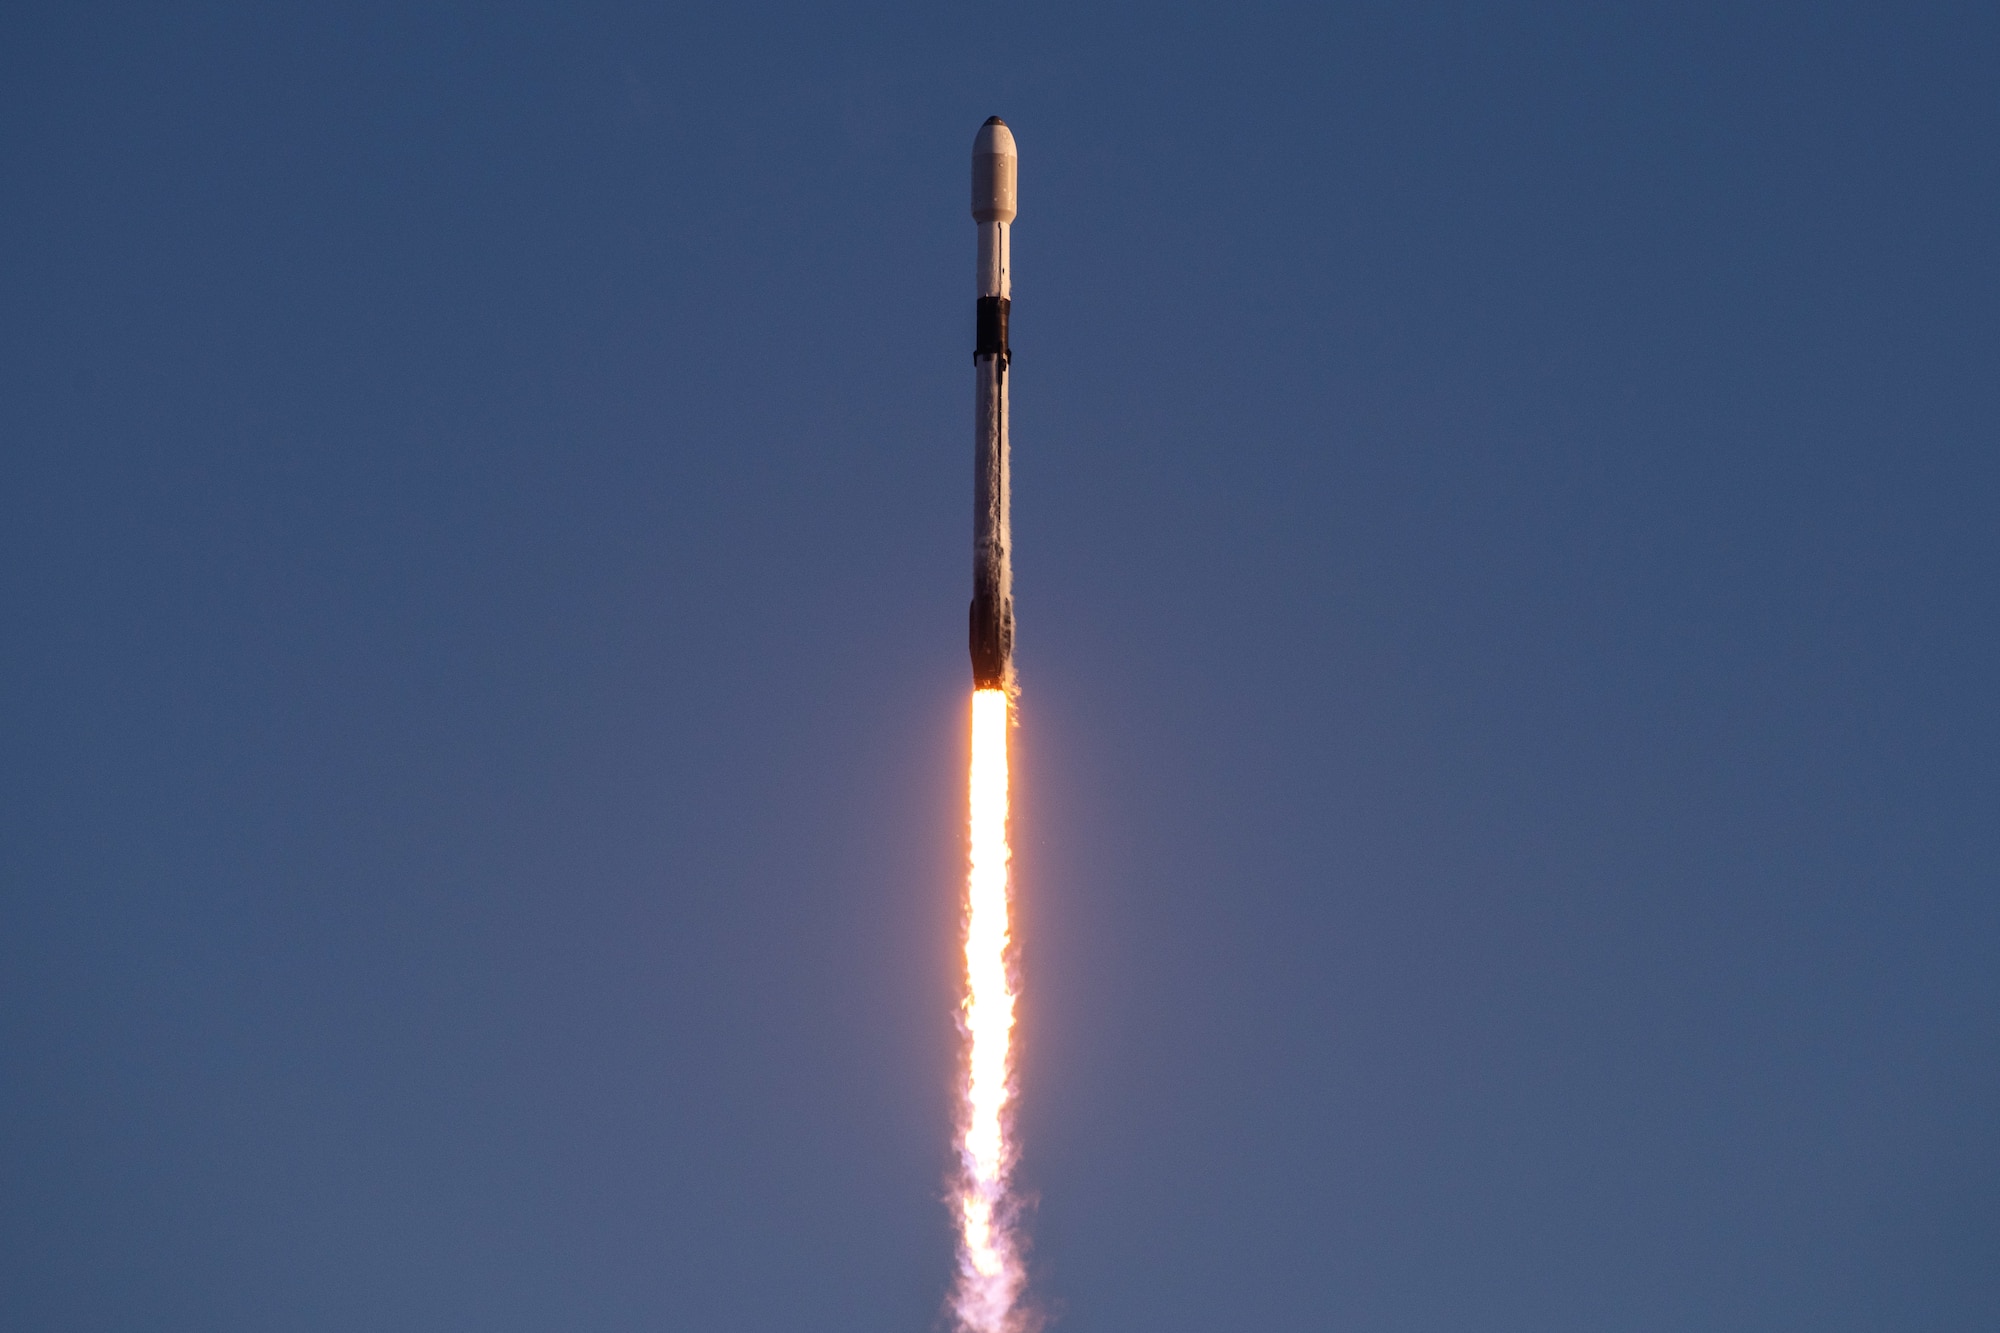 A SpaceX Falcon 9 rocket launches from Space Launch Complex 40 at Cape Canaveral Space Force Station, Fla., Nov. 13, 2021. The rocket carried 53 Starlink satellites into orbit. (U.S. Space Force photo by Joshua Conti)